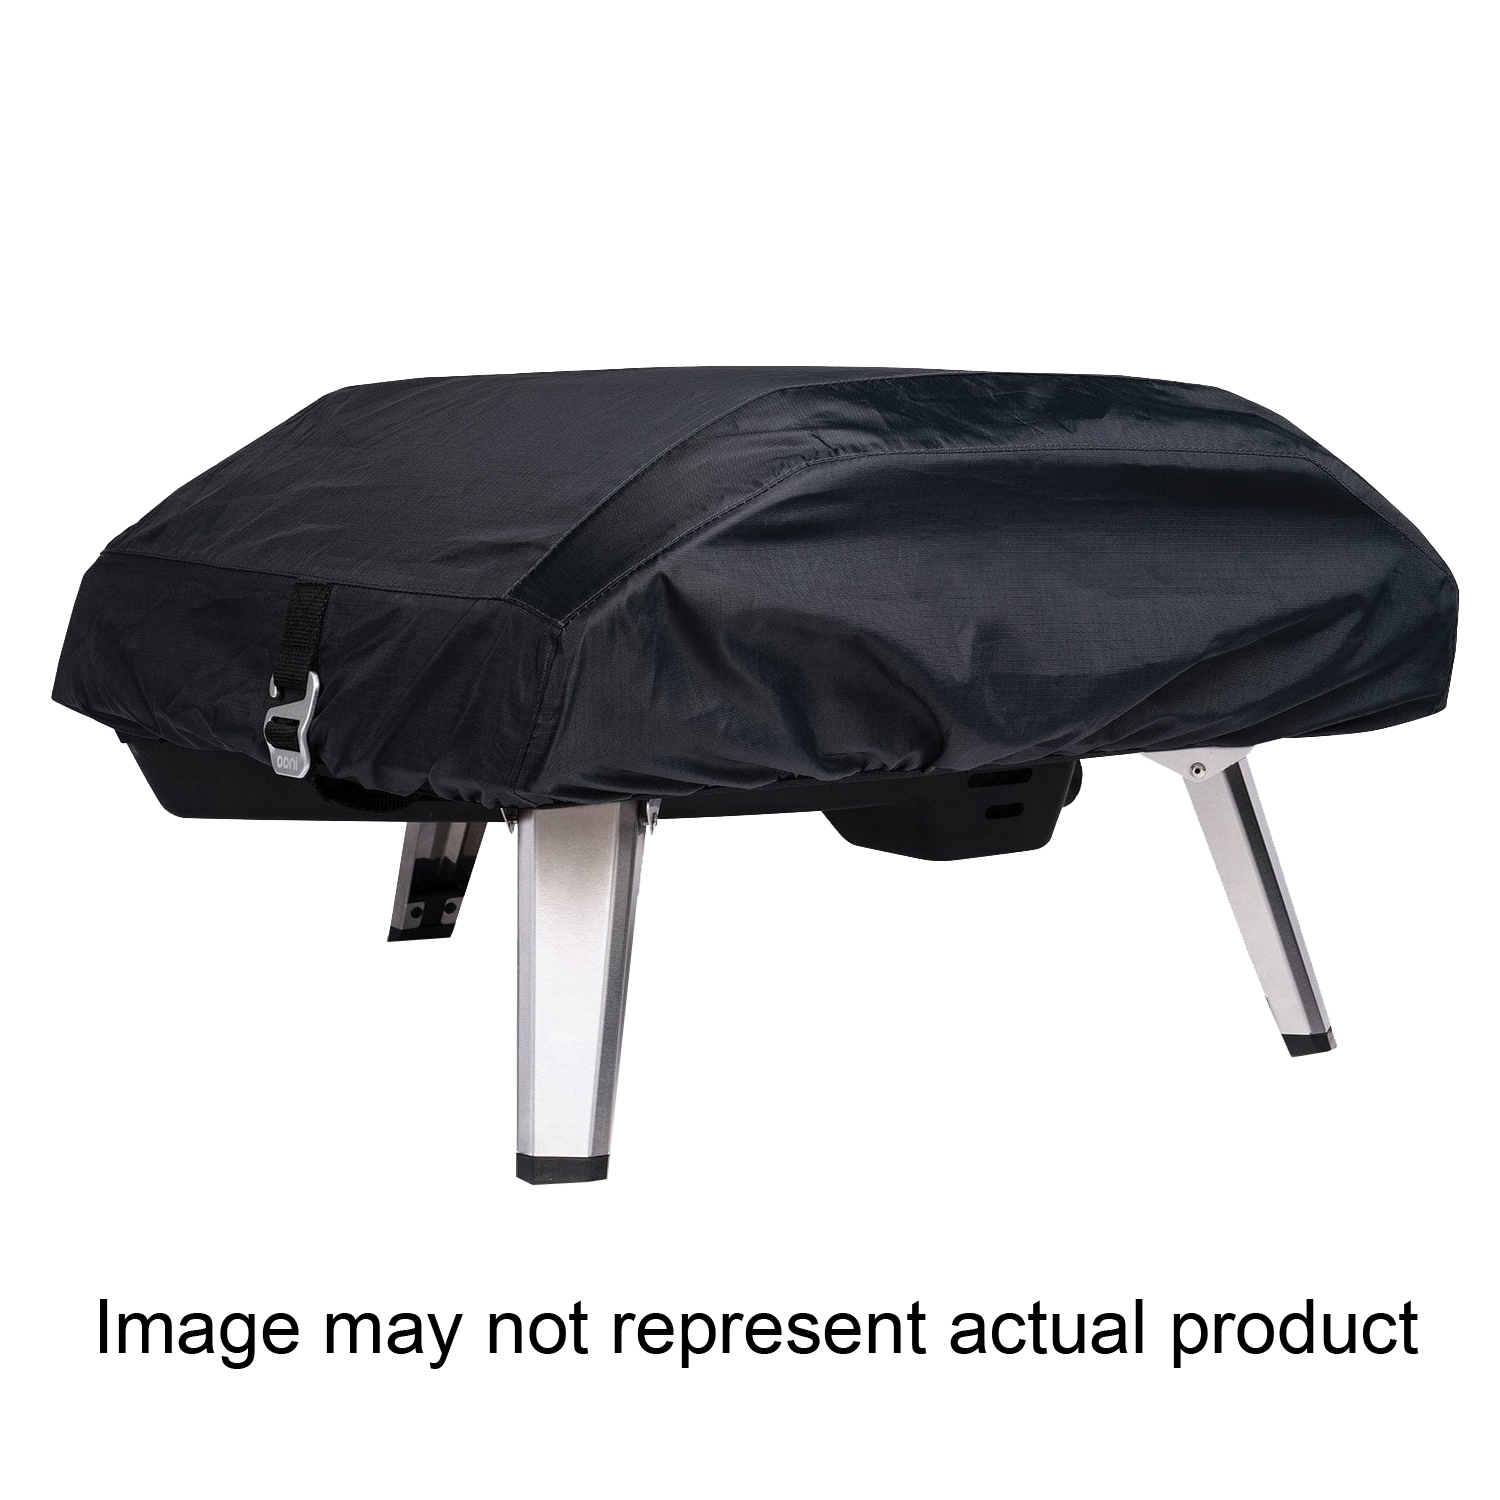 Koda 16 Series UU-P0AF00 Pizza Oven Cover, Aluminum/Polyester, Black, For: Ooni Koda 16 Pizza Oven